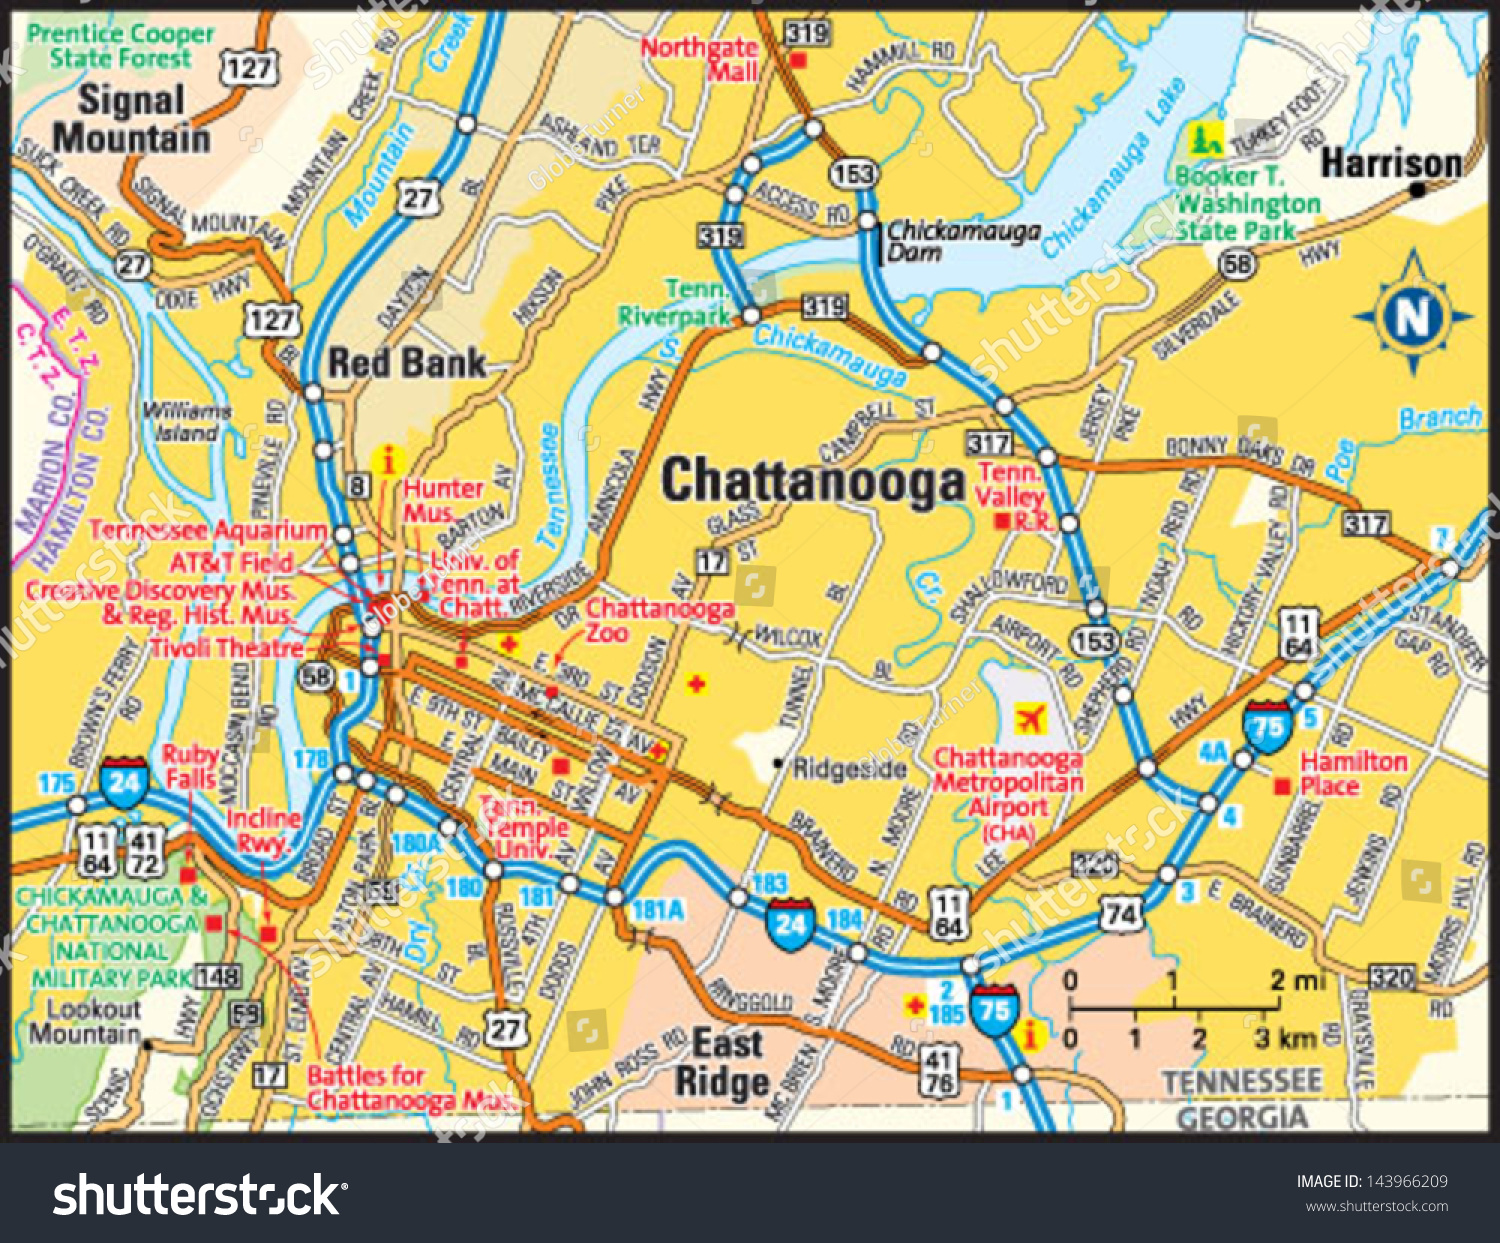 map of chattanooga tn Chattanooga Tennessee Area Map Stock Vector Royalty Free 143966209